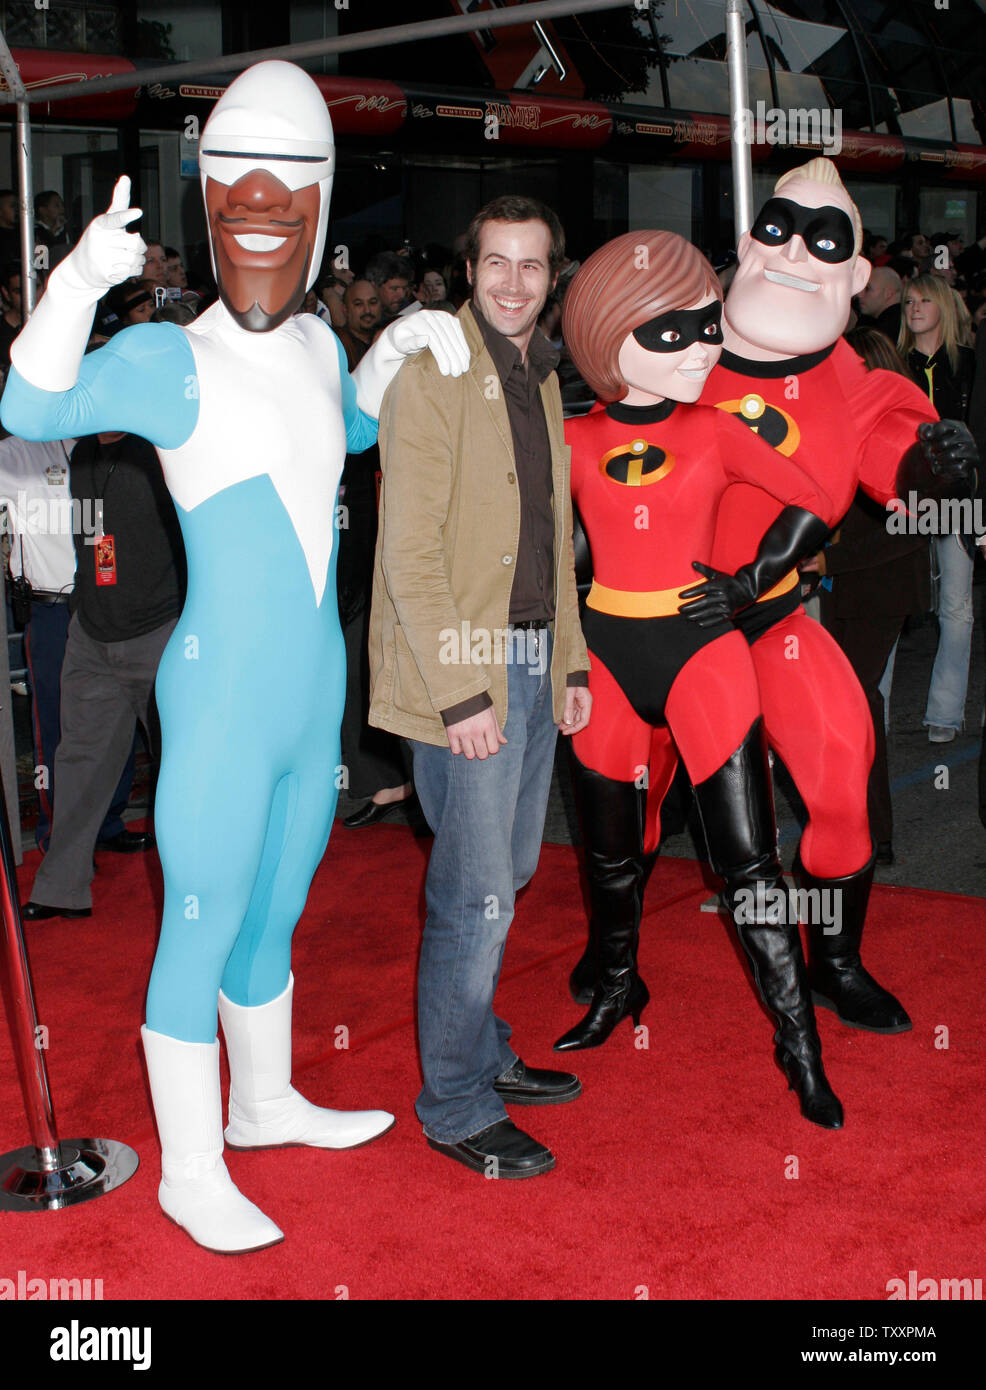 Actor Jason Lee, center, who is the voice of the character, 'Syndrome',  poses for photographers with costumed actors at the premiere of the new  animated film from Pixar, 'The Incredibles' at the